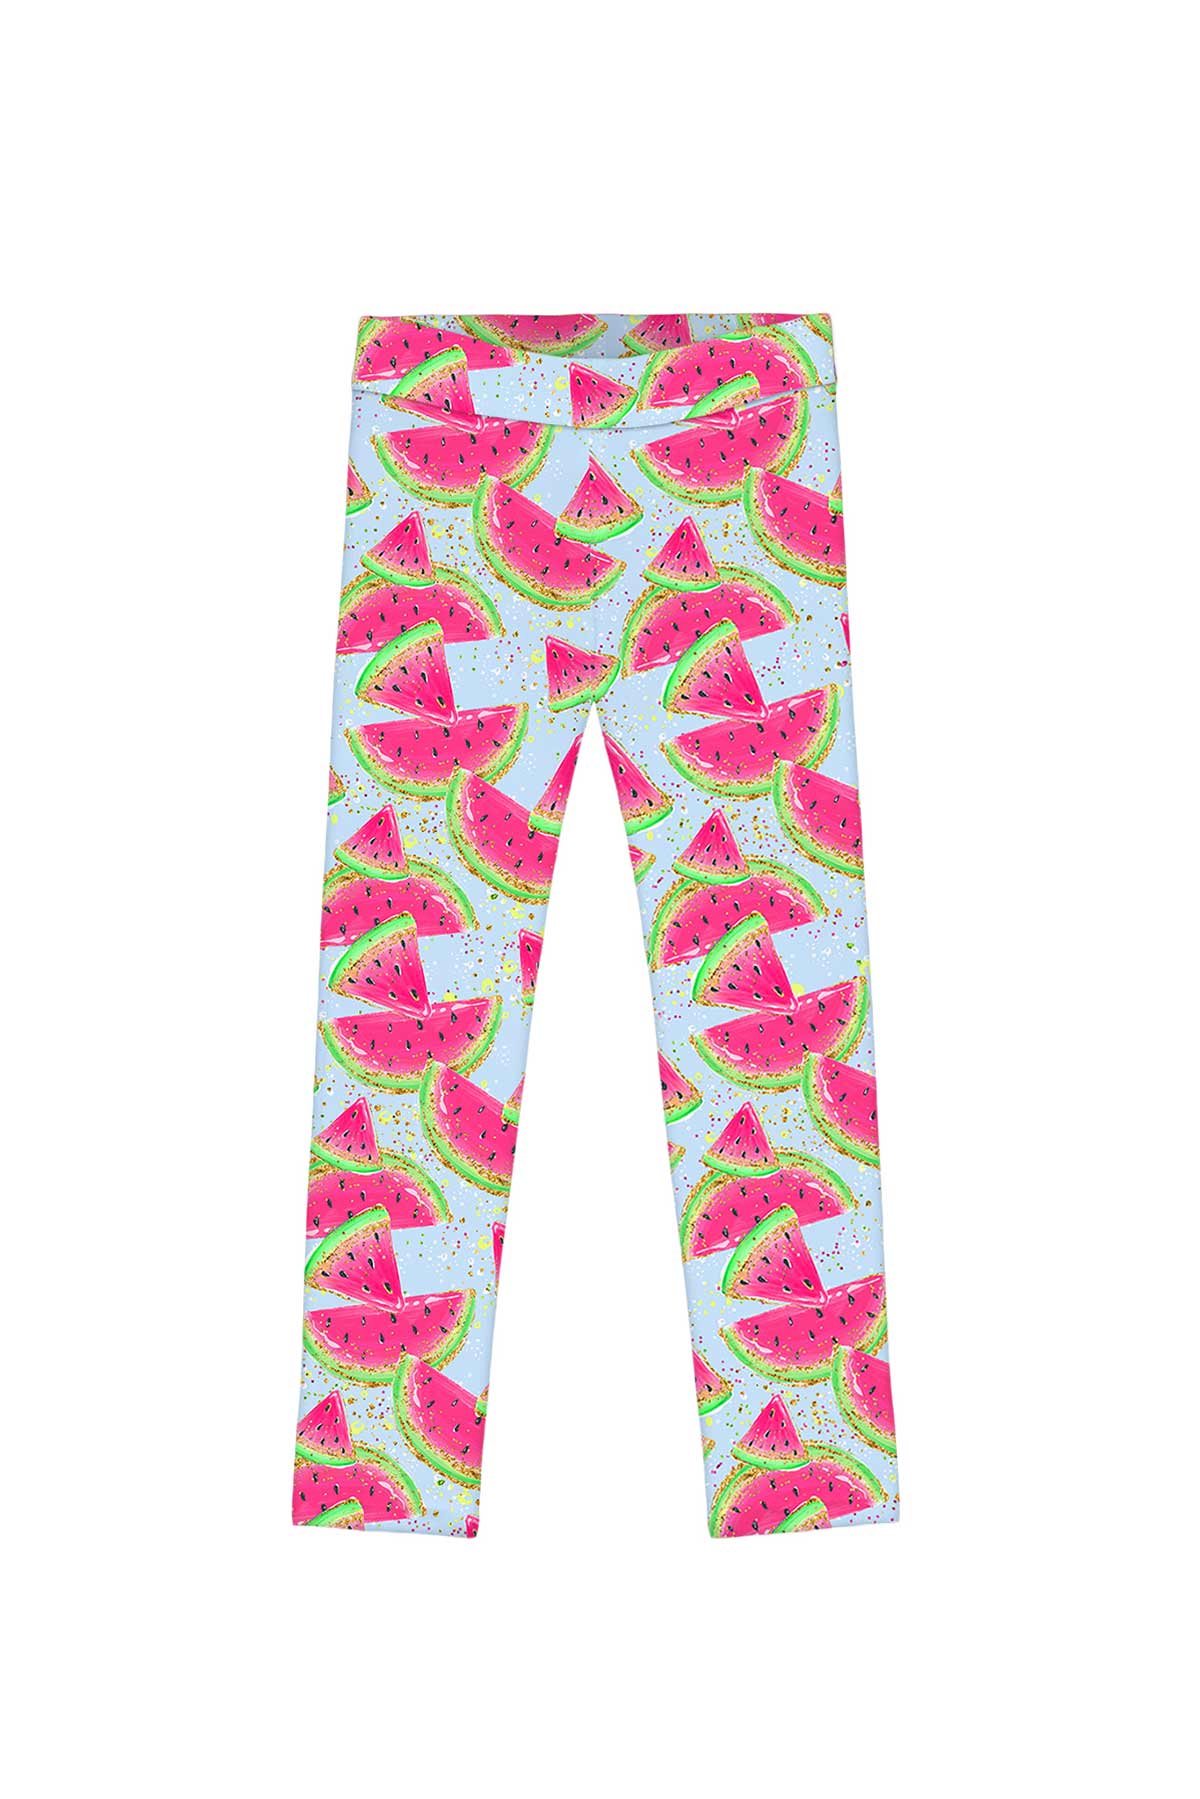 One in a Melon Lucy Blue Watermelon Summer Print Leggings - Kids - Pineapple Clothing